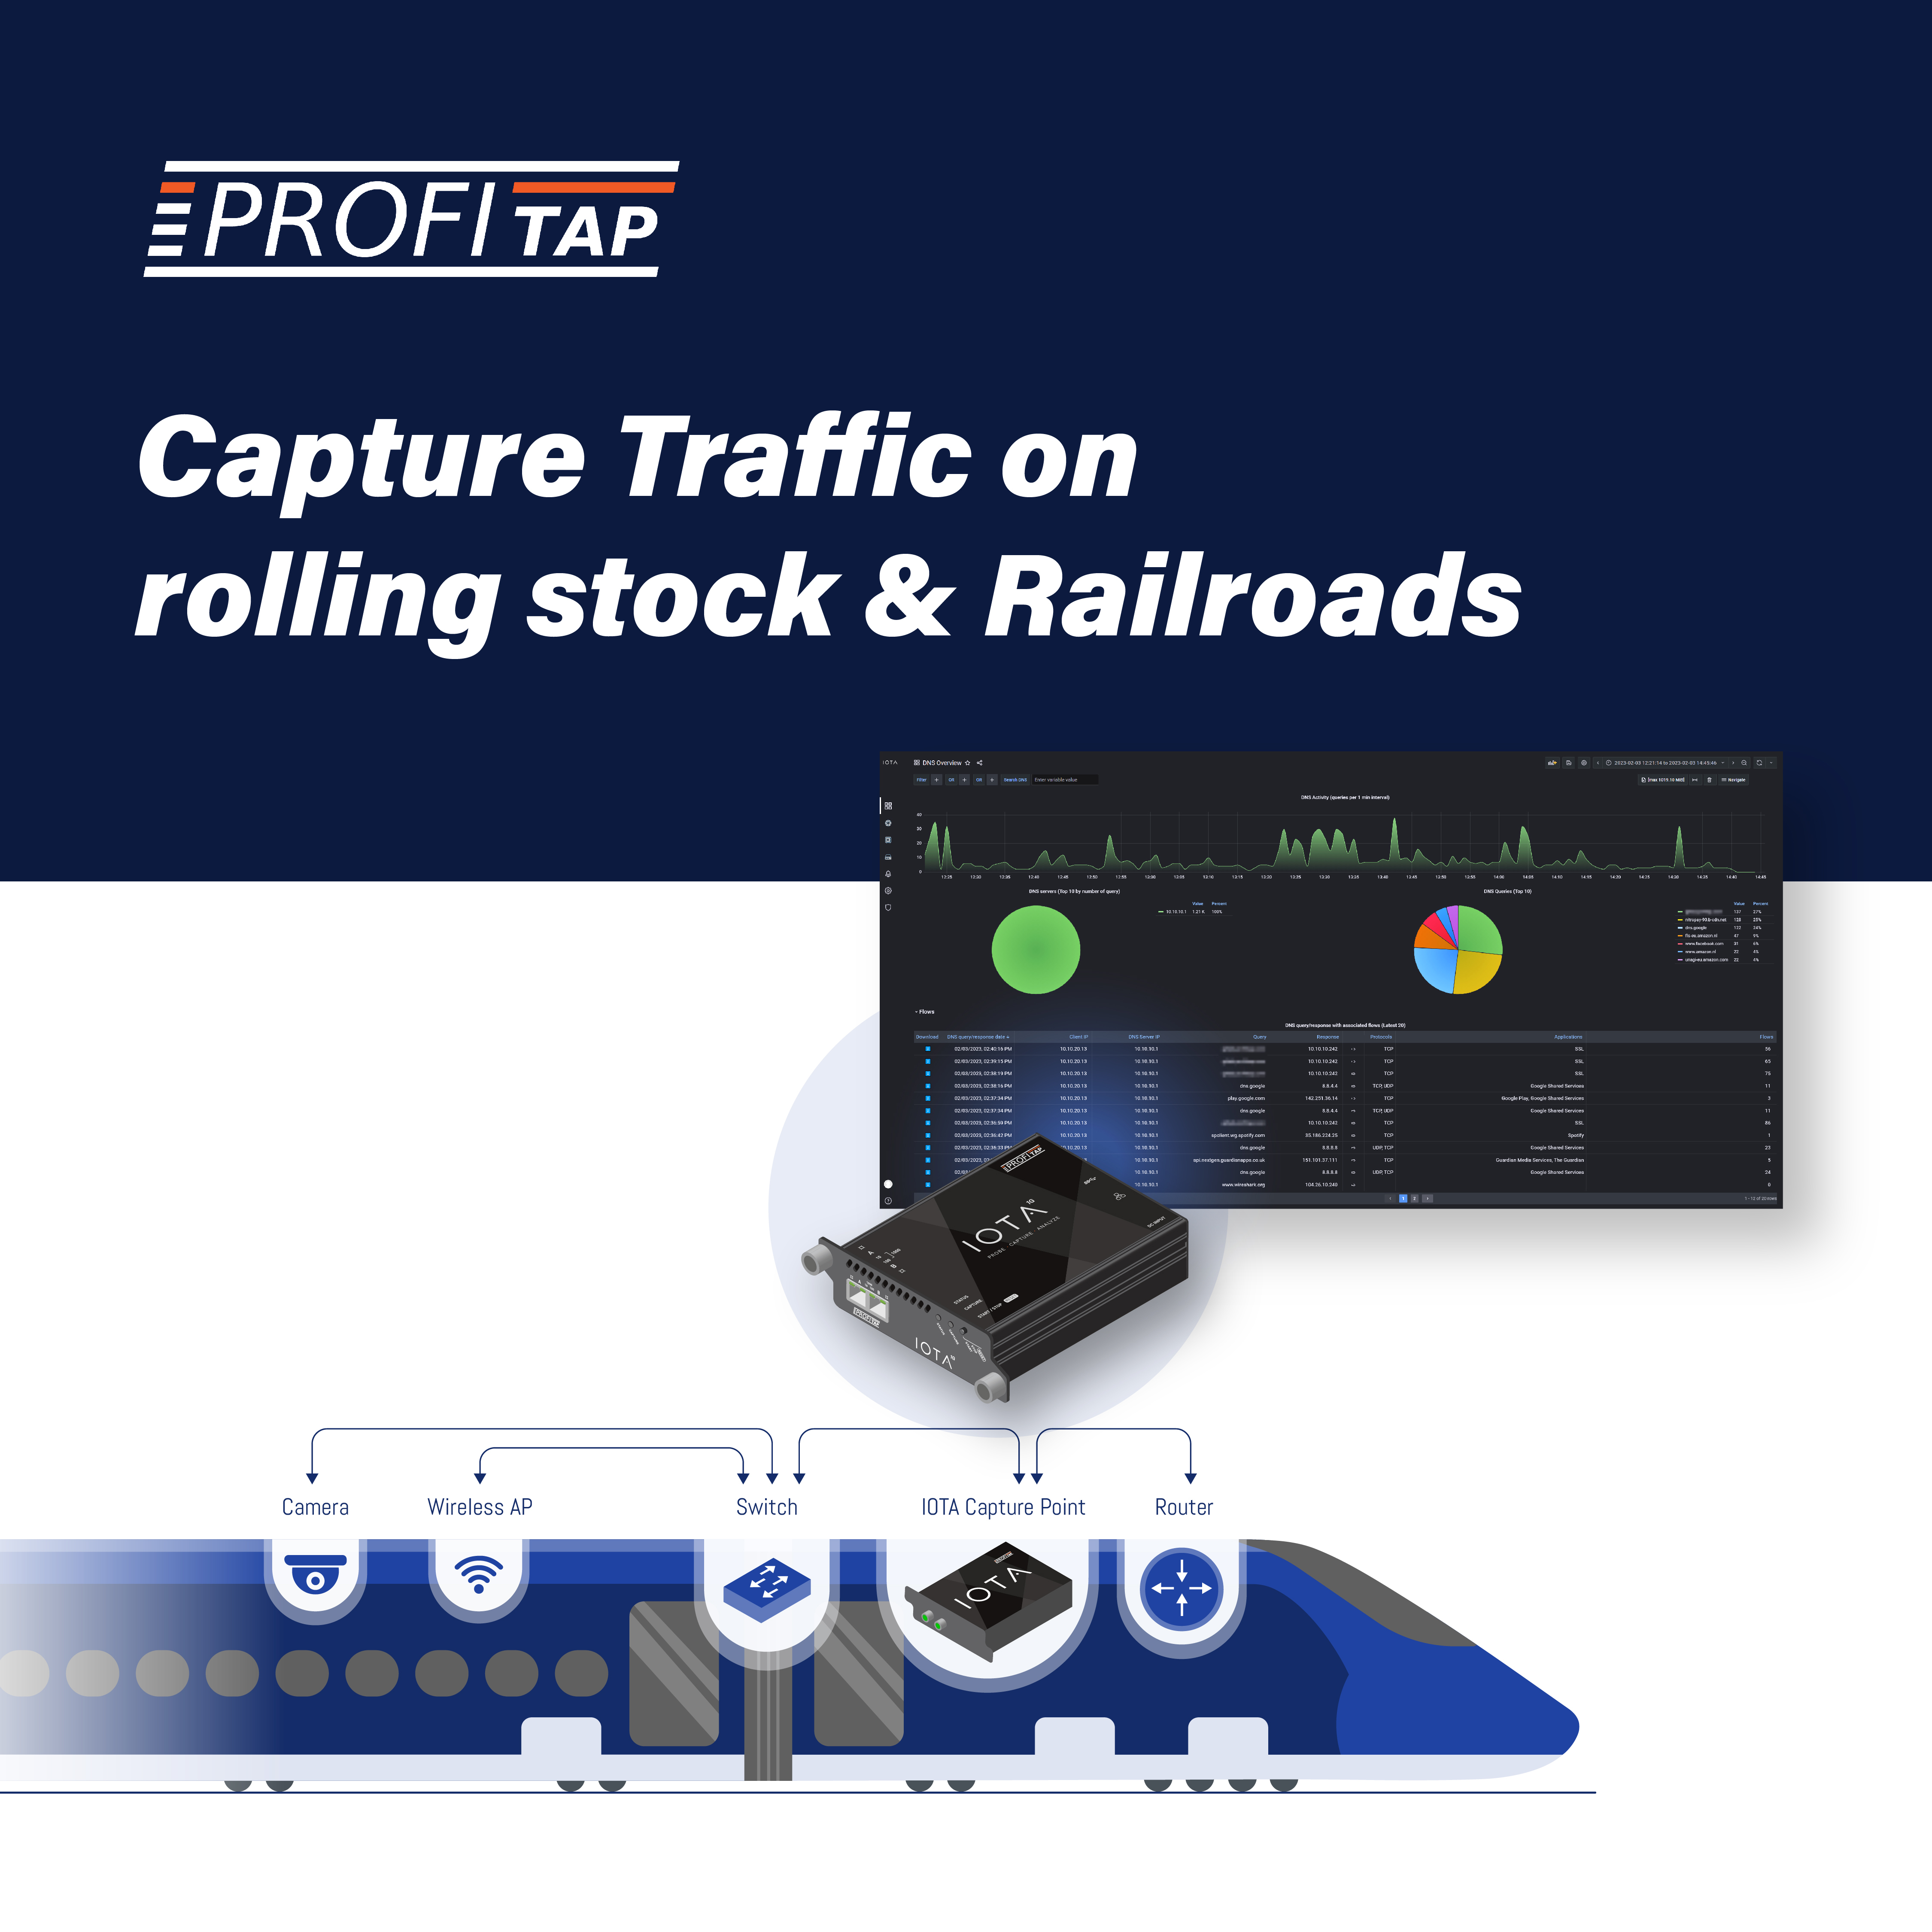 Remote network capture and troubleshooting on trains